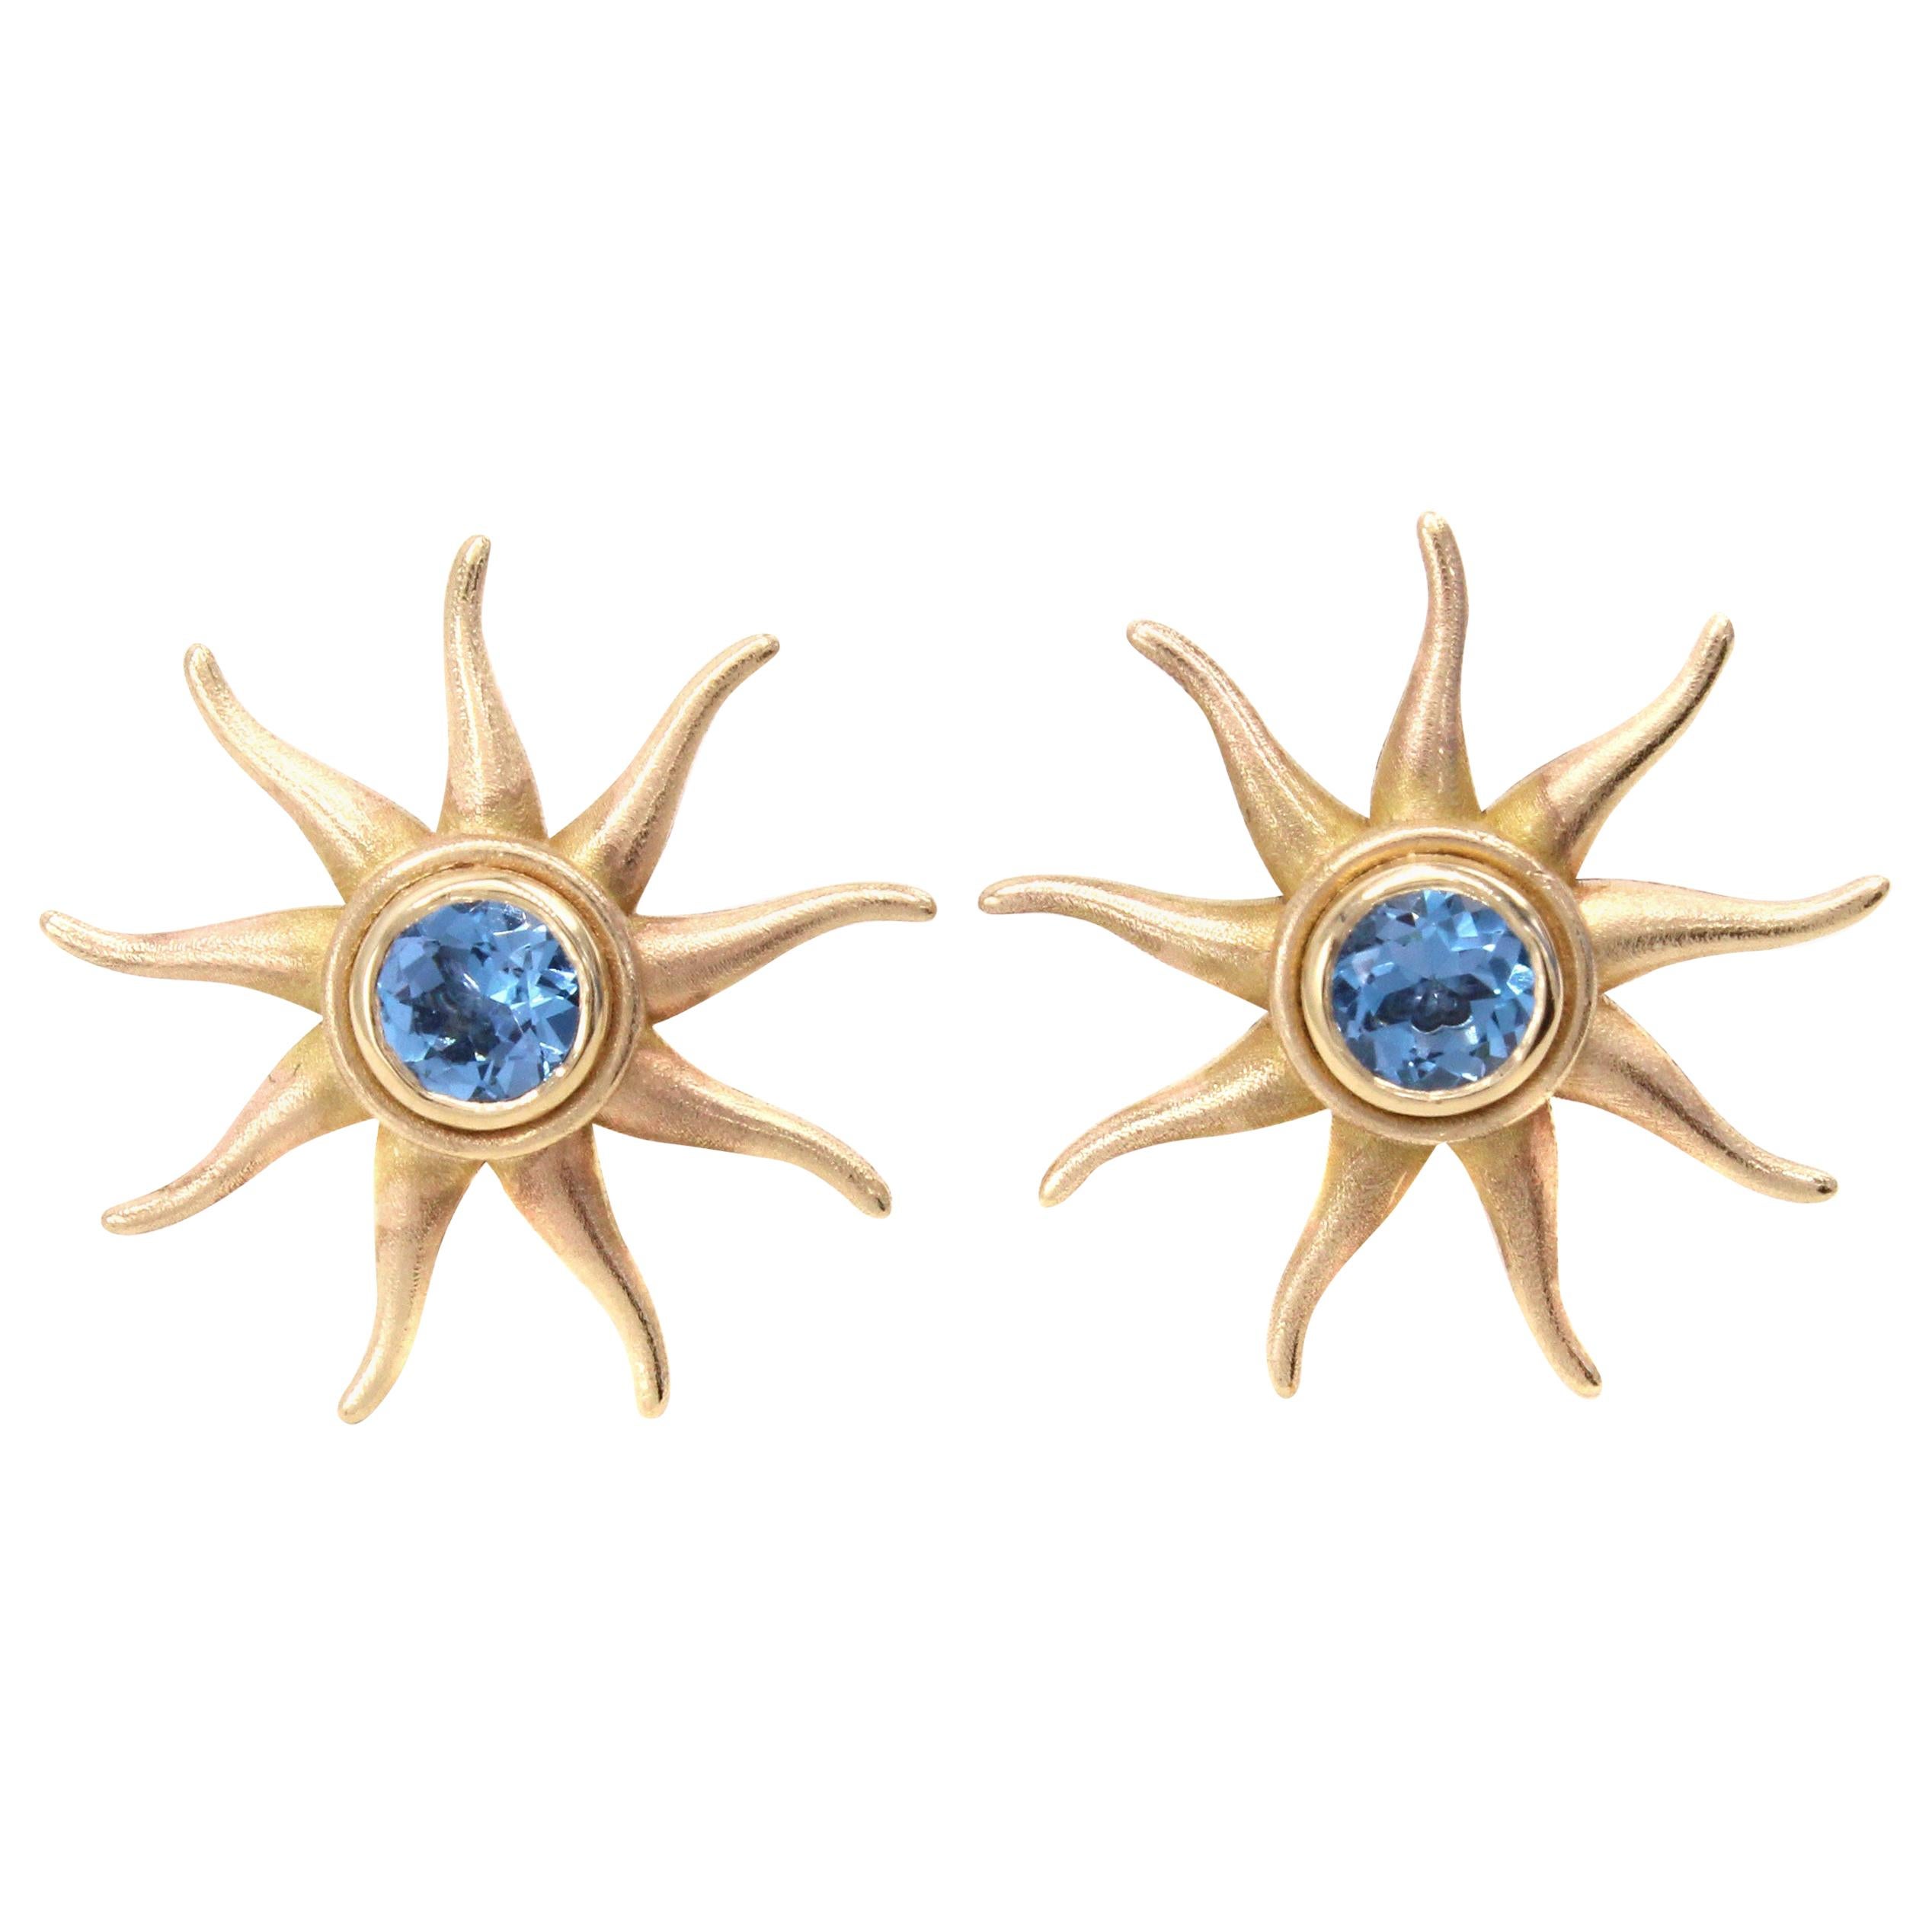 Our unique sunburst earrings are an exciting addition to the line of Rive Gauche Jewelry original designs, offering a new and exciting versatility. These wearable sunbursts are fun and elegant and provide the perfect balance between bold and